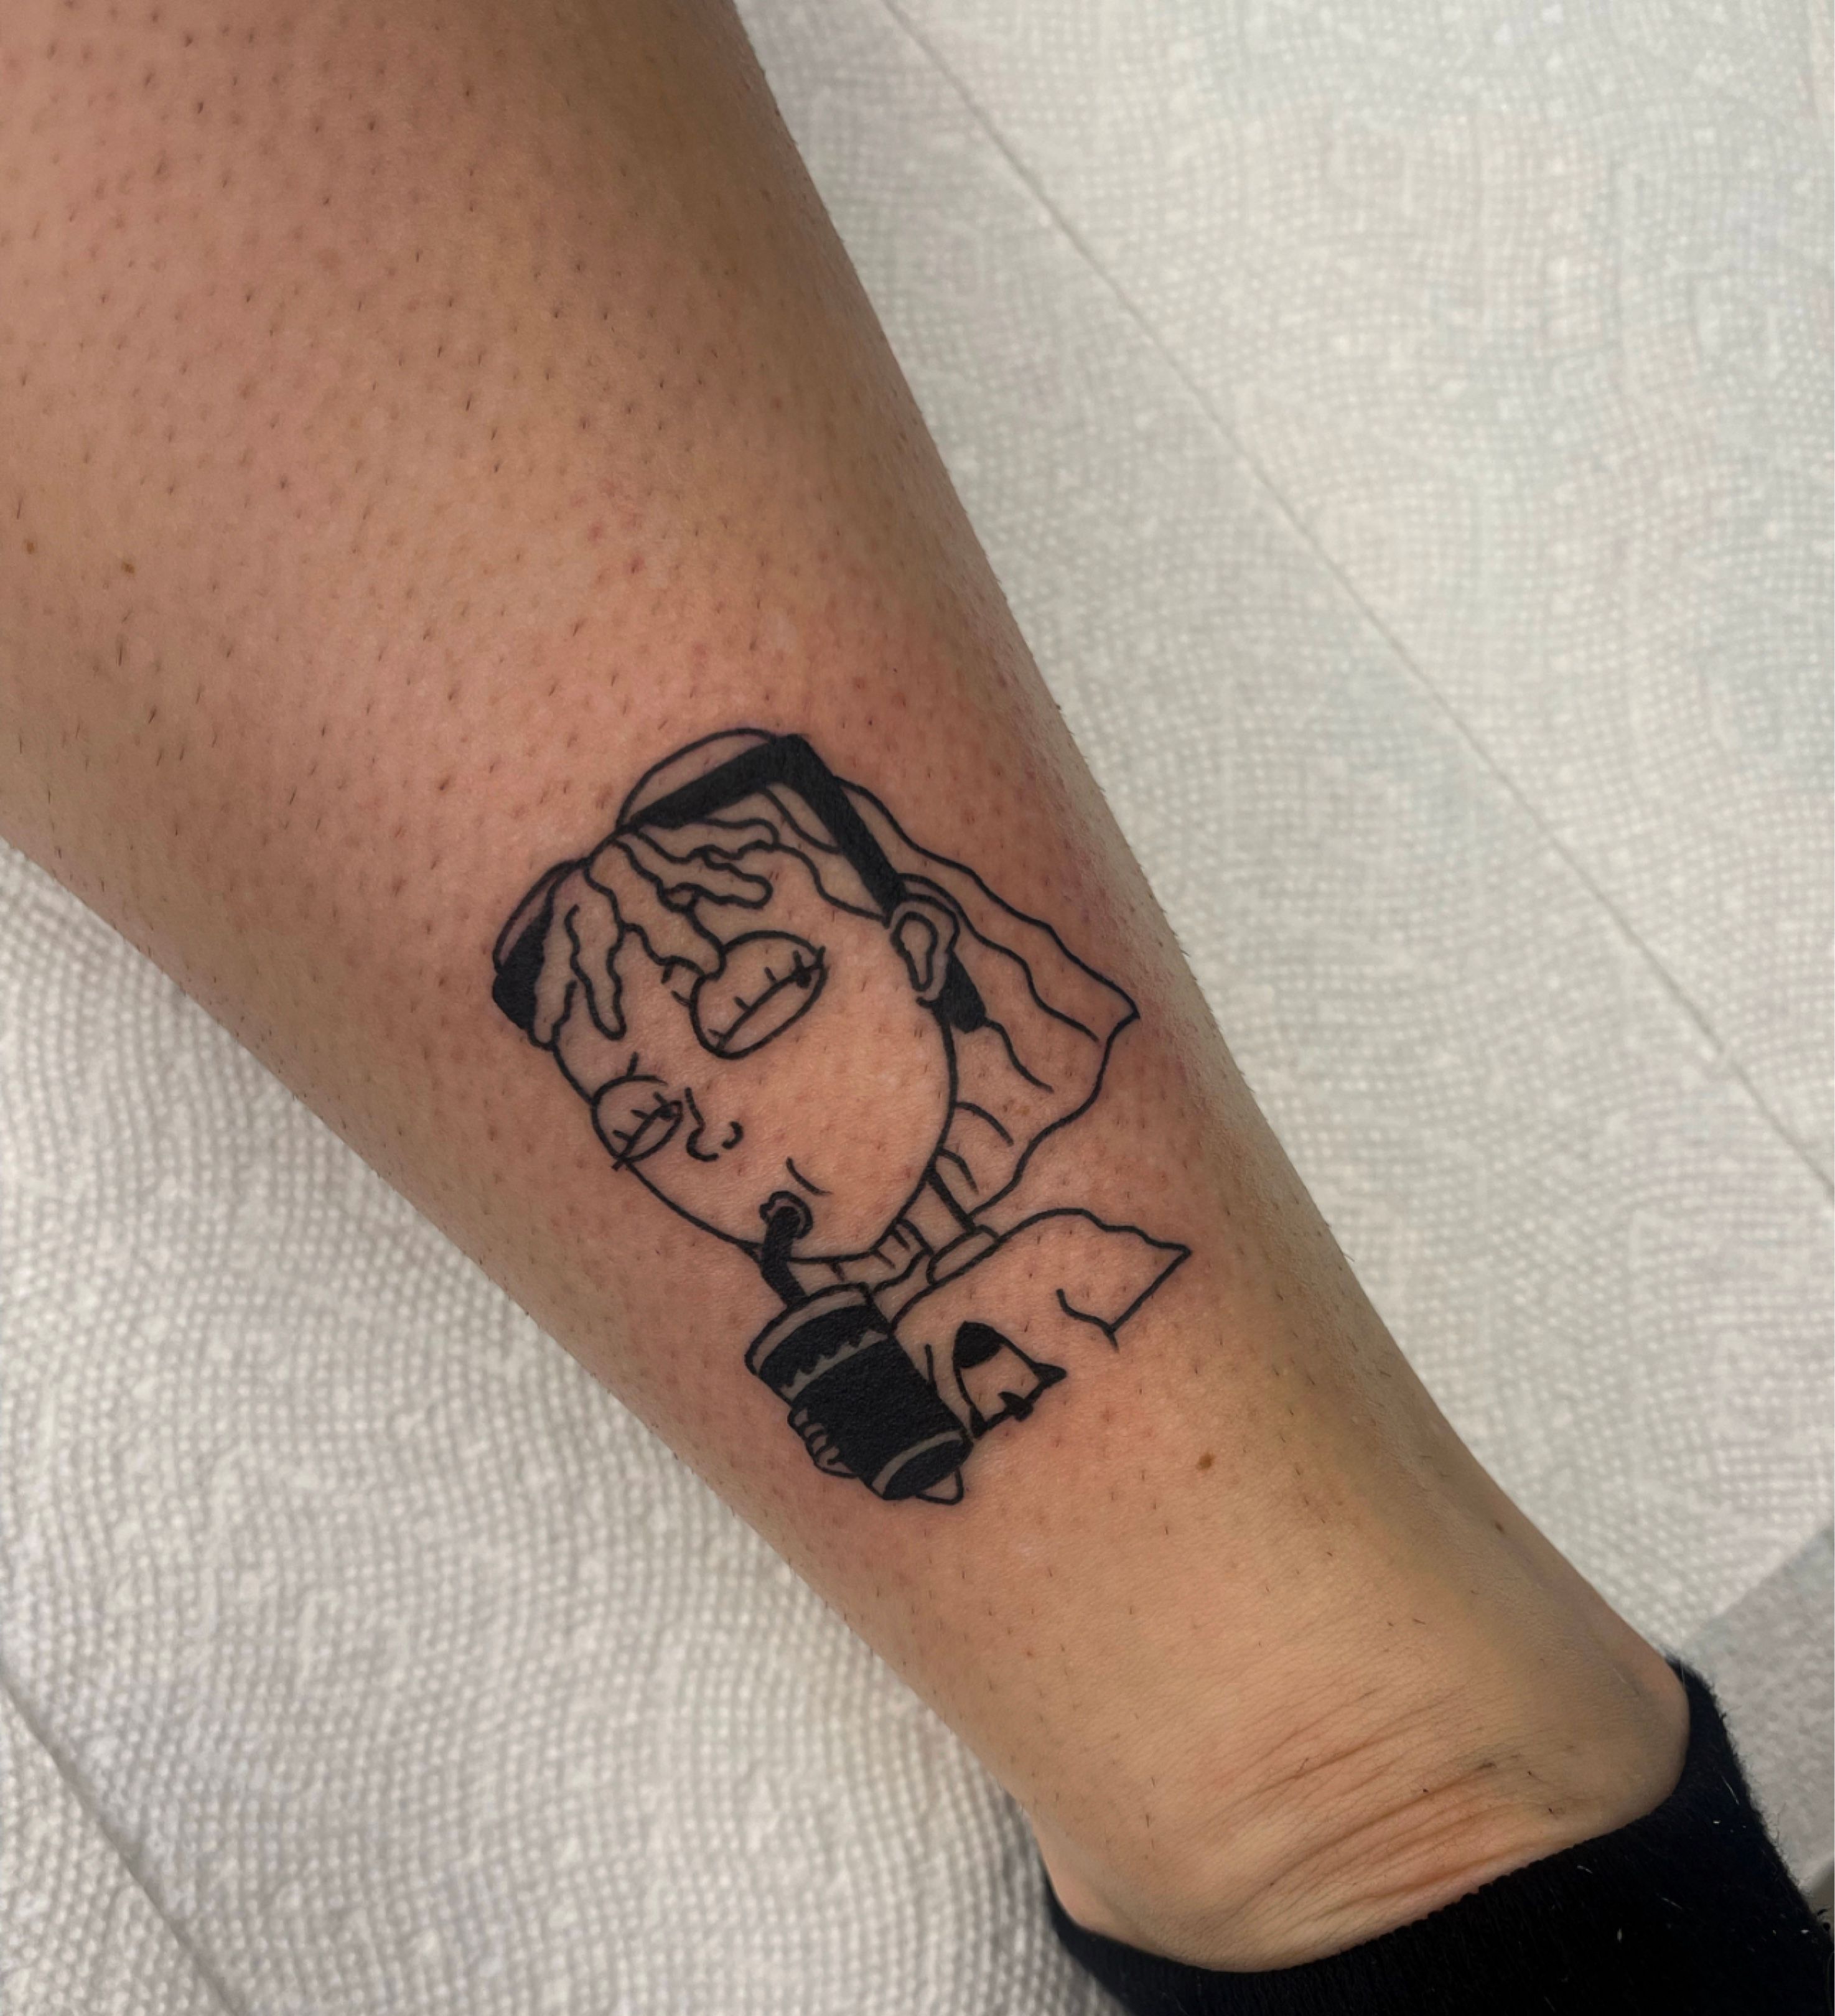 Willy G Tattoo on X: 